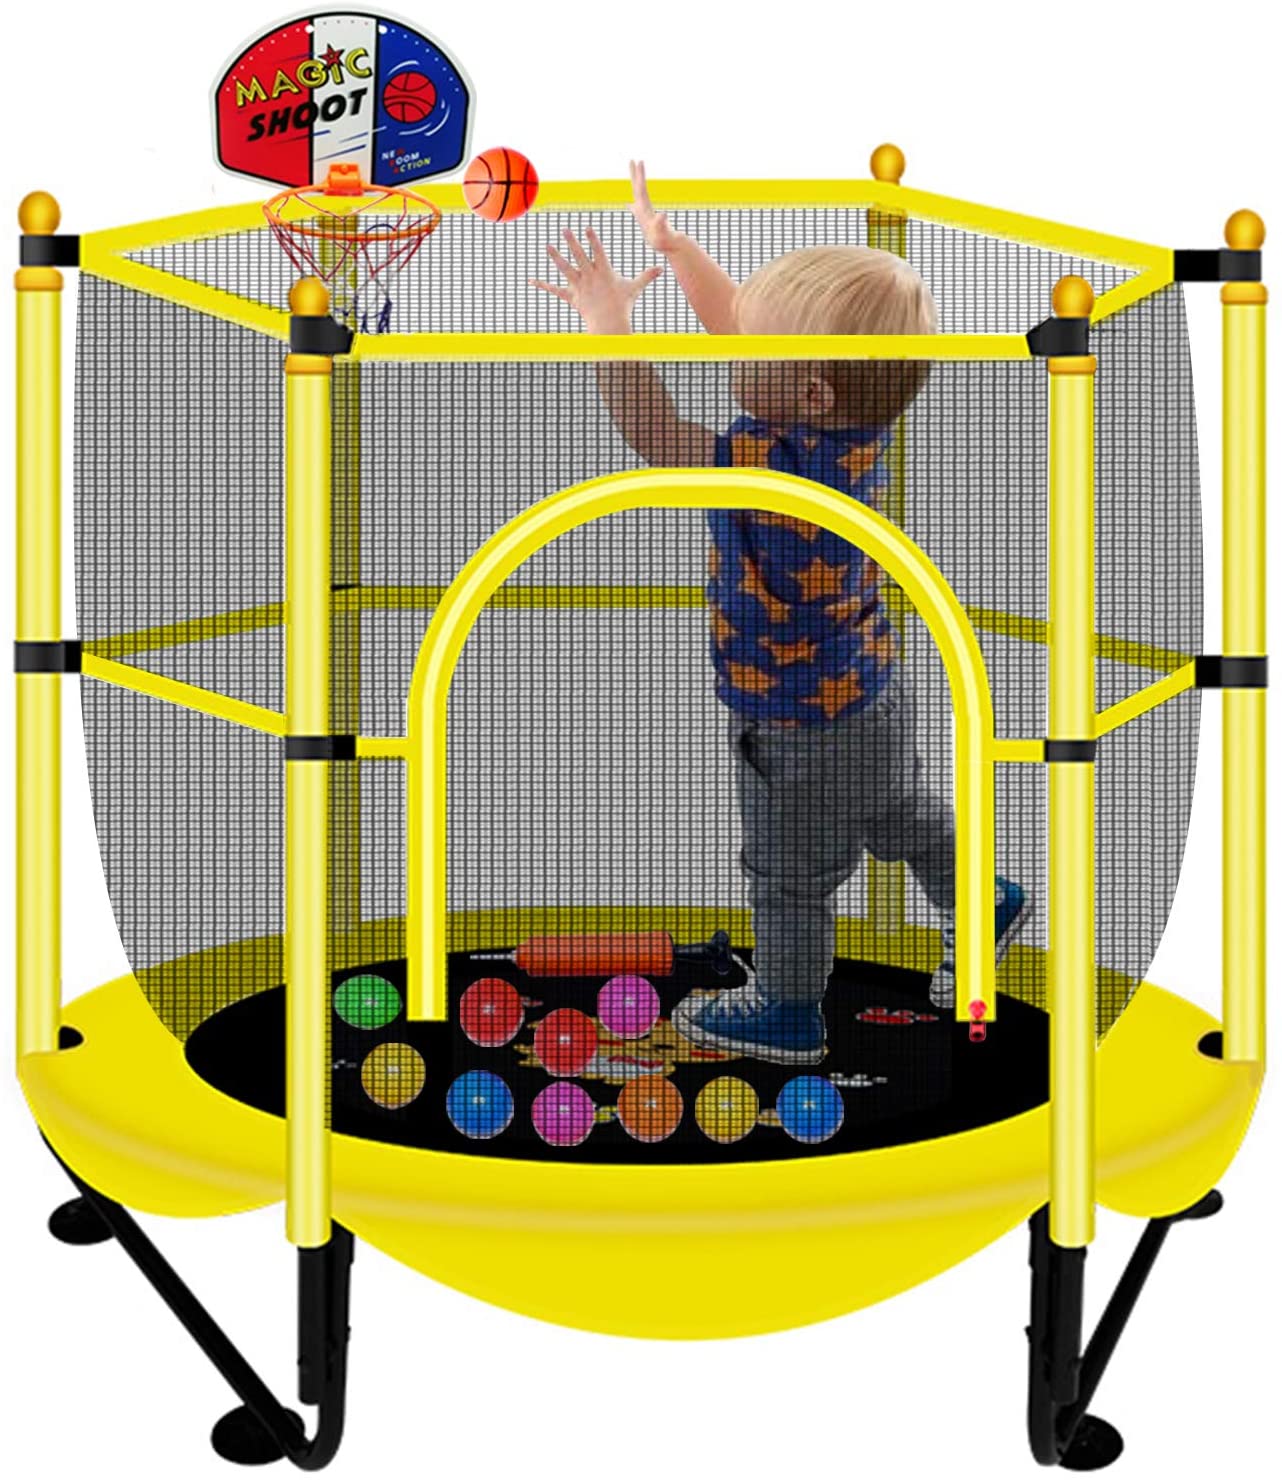 Asee'm Indoor Trampoline for Kids with Net - 5 FT Outdoor Mini Toddler Trampoline with Safety Enclosure for Fun, 60" Small Trampoline Jumping Mat for Toddlers